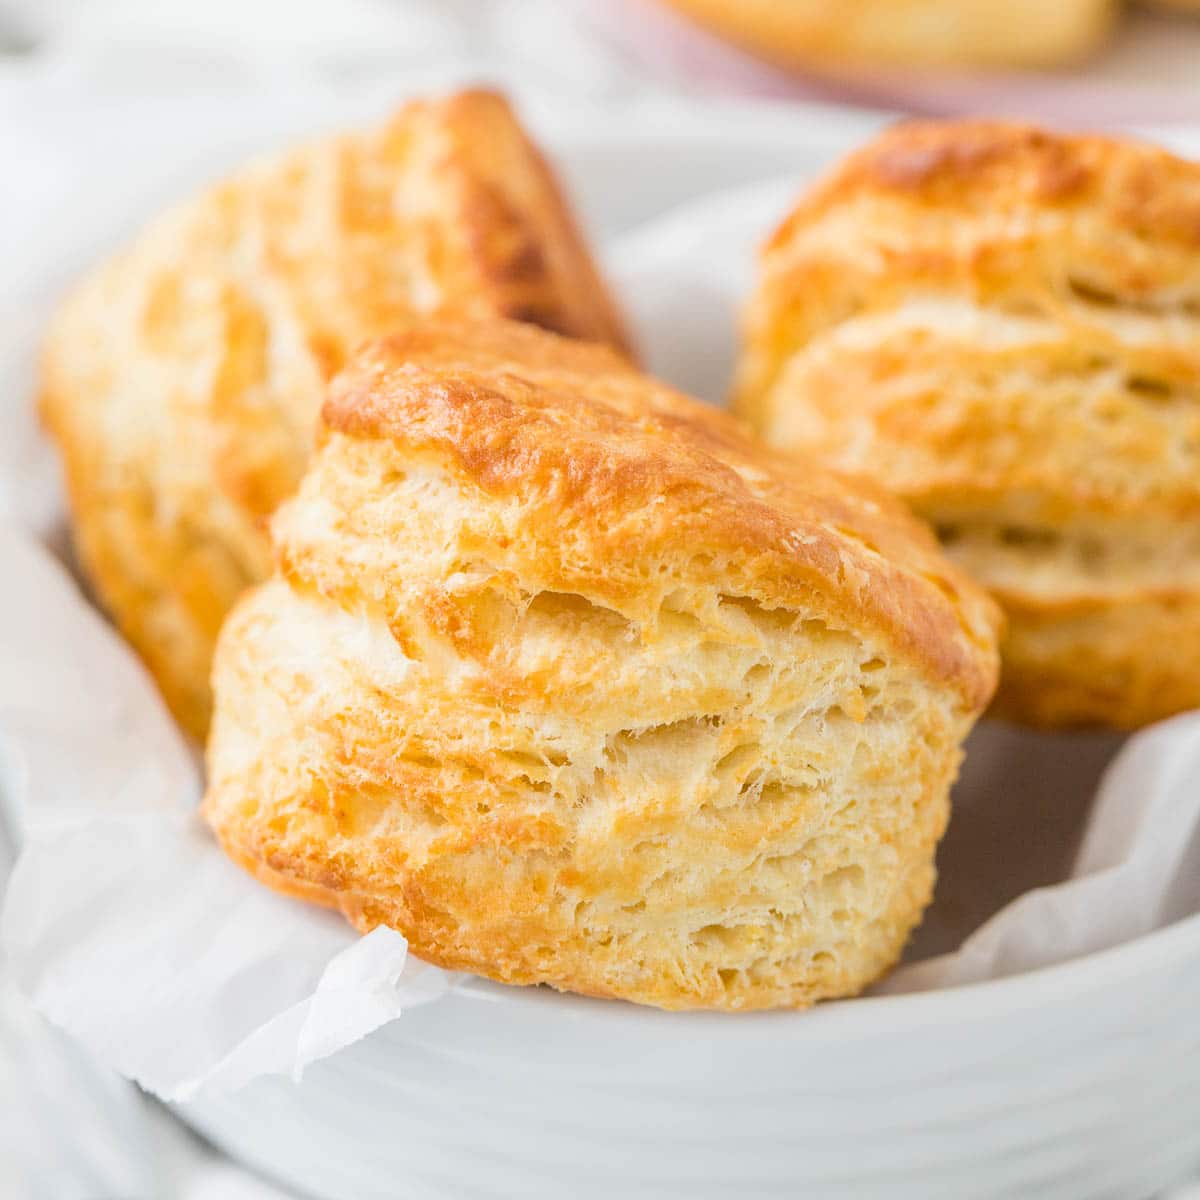 https://platedcravings.com/wp-content/uploads/2021/01/Air-Fryer-Biscuits-Plated-Cravings-18.jpg